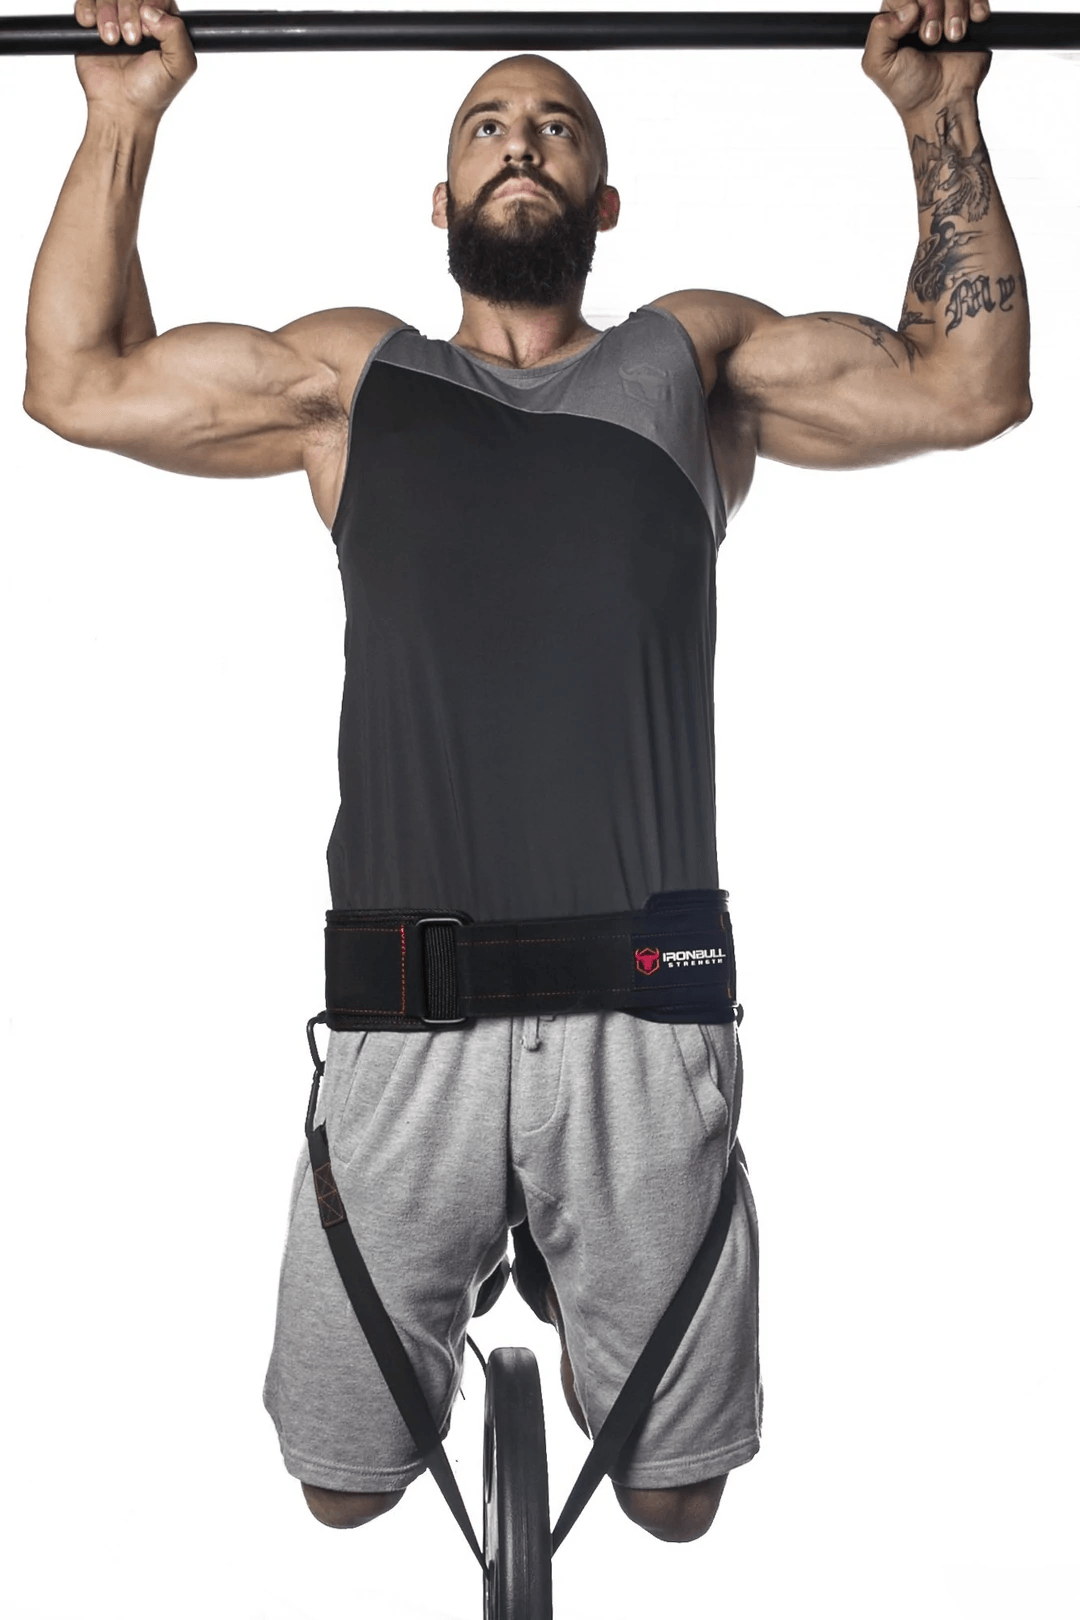 Buy the flex belt abs Wholesale From Experienced Suppliers